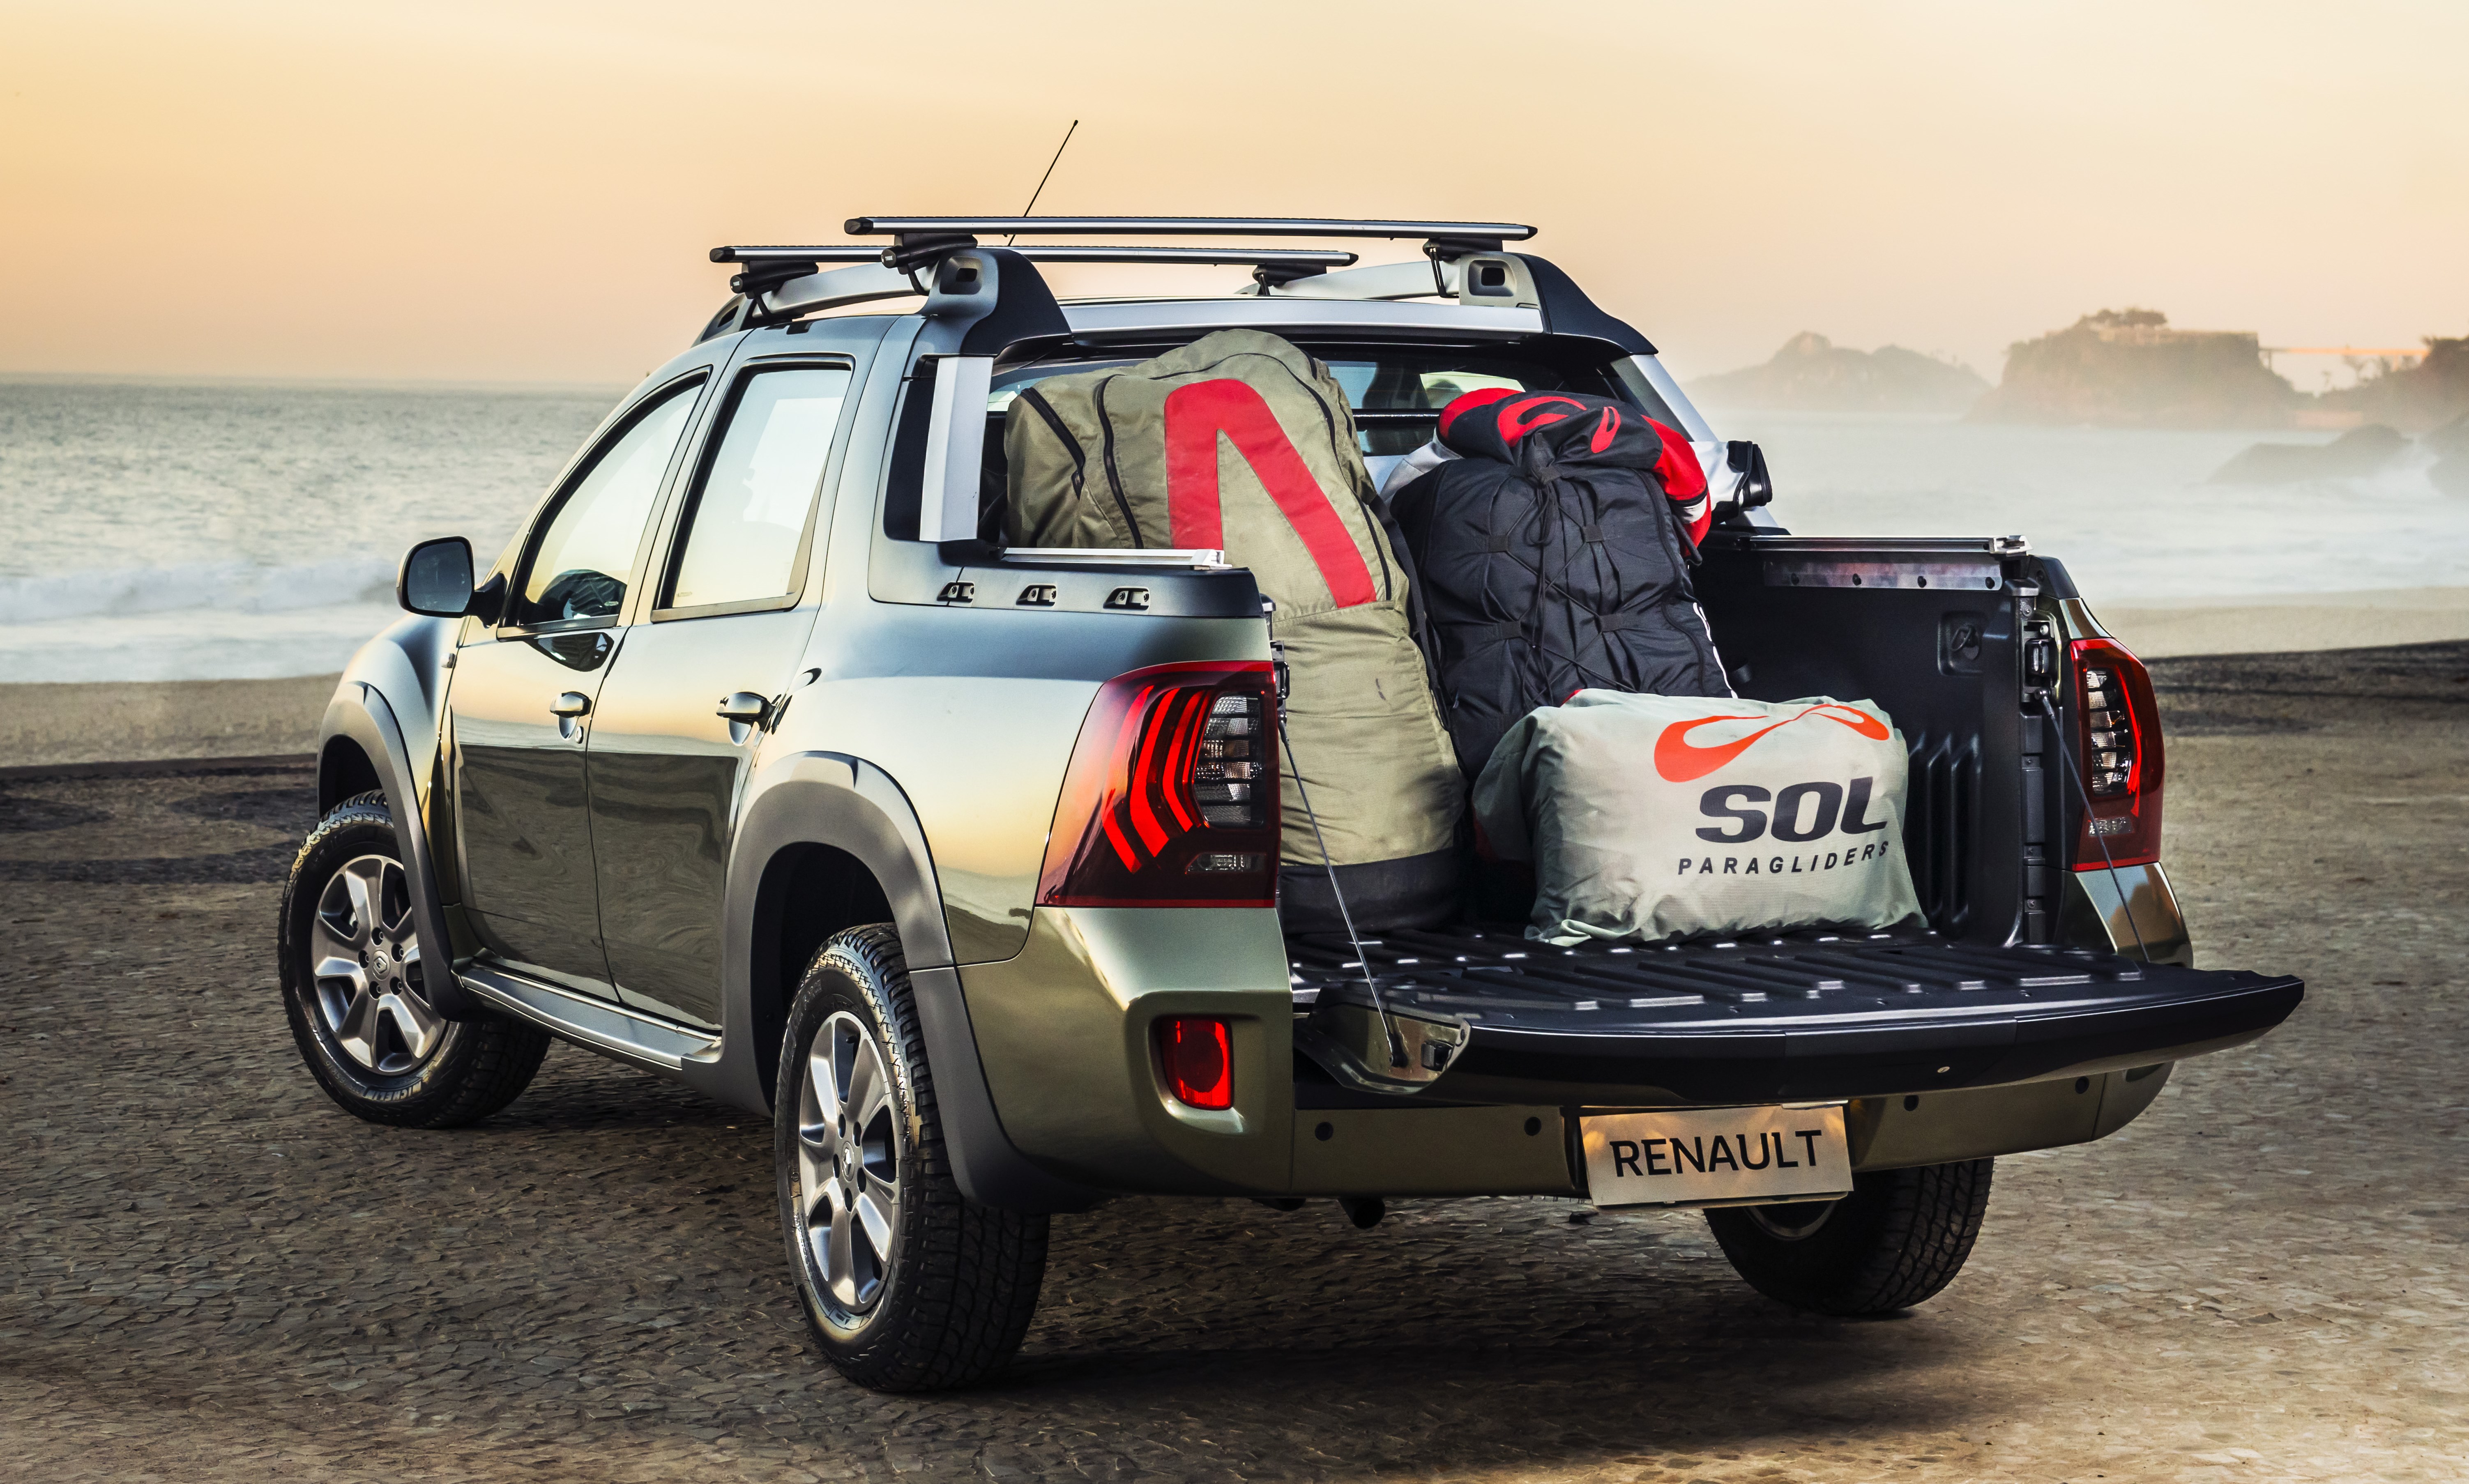 Renault Duster Oroch accessories 2015